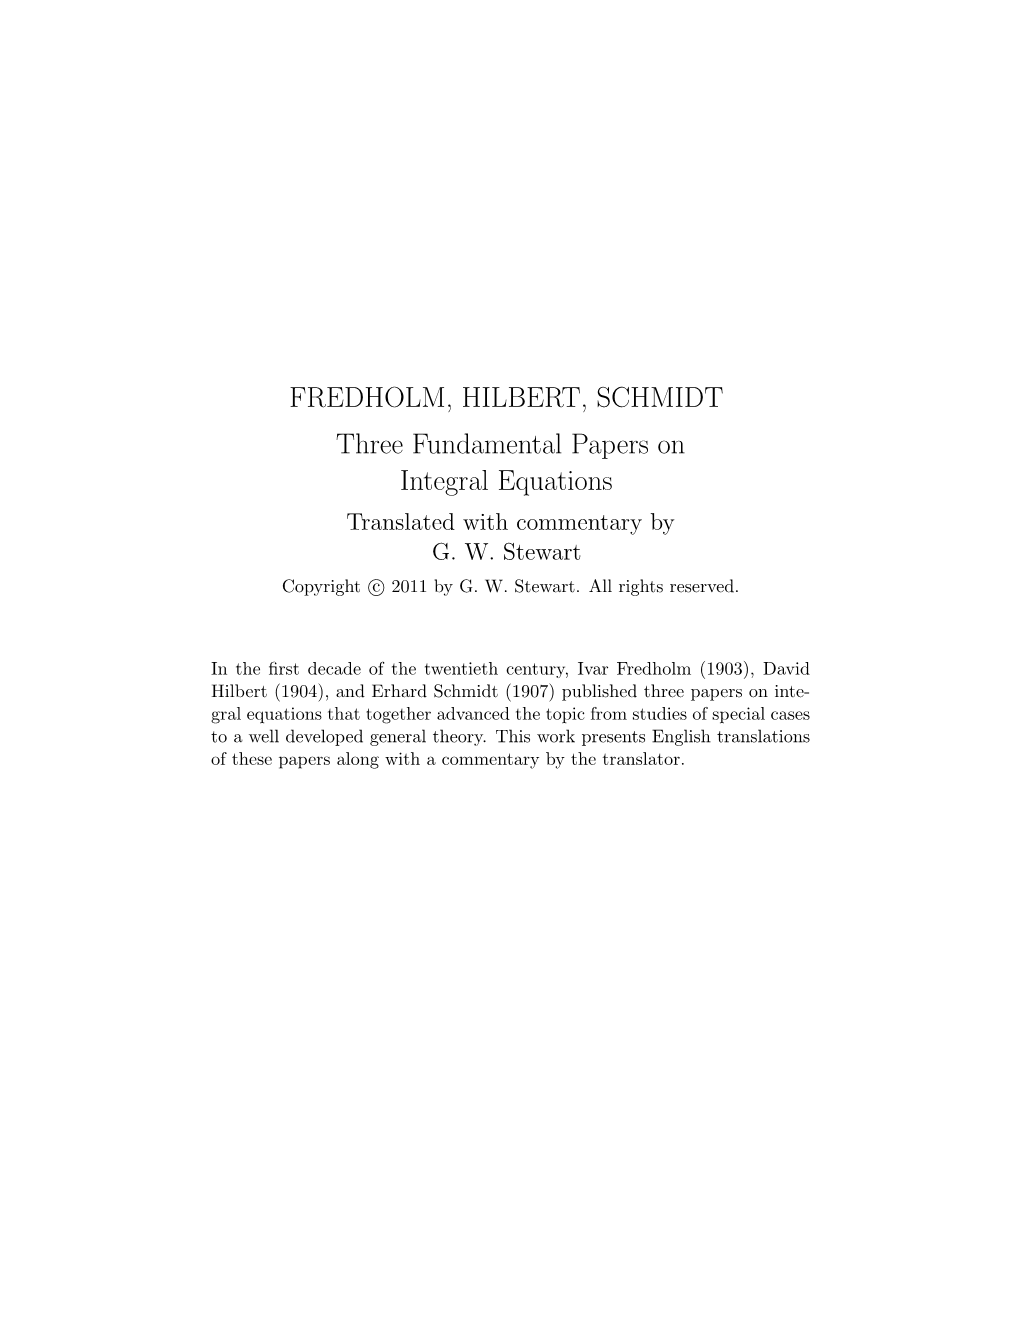 FREDHOLM, HILBERT, SCHMIDT Three Fundamental Papers on Integral Equations Translated with Commentary by G